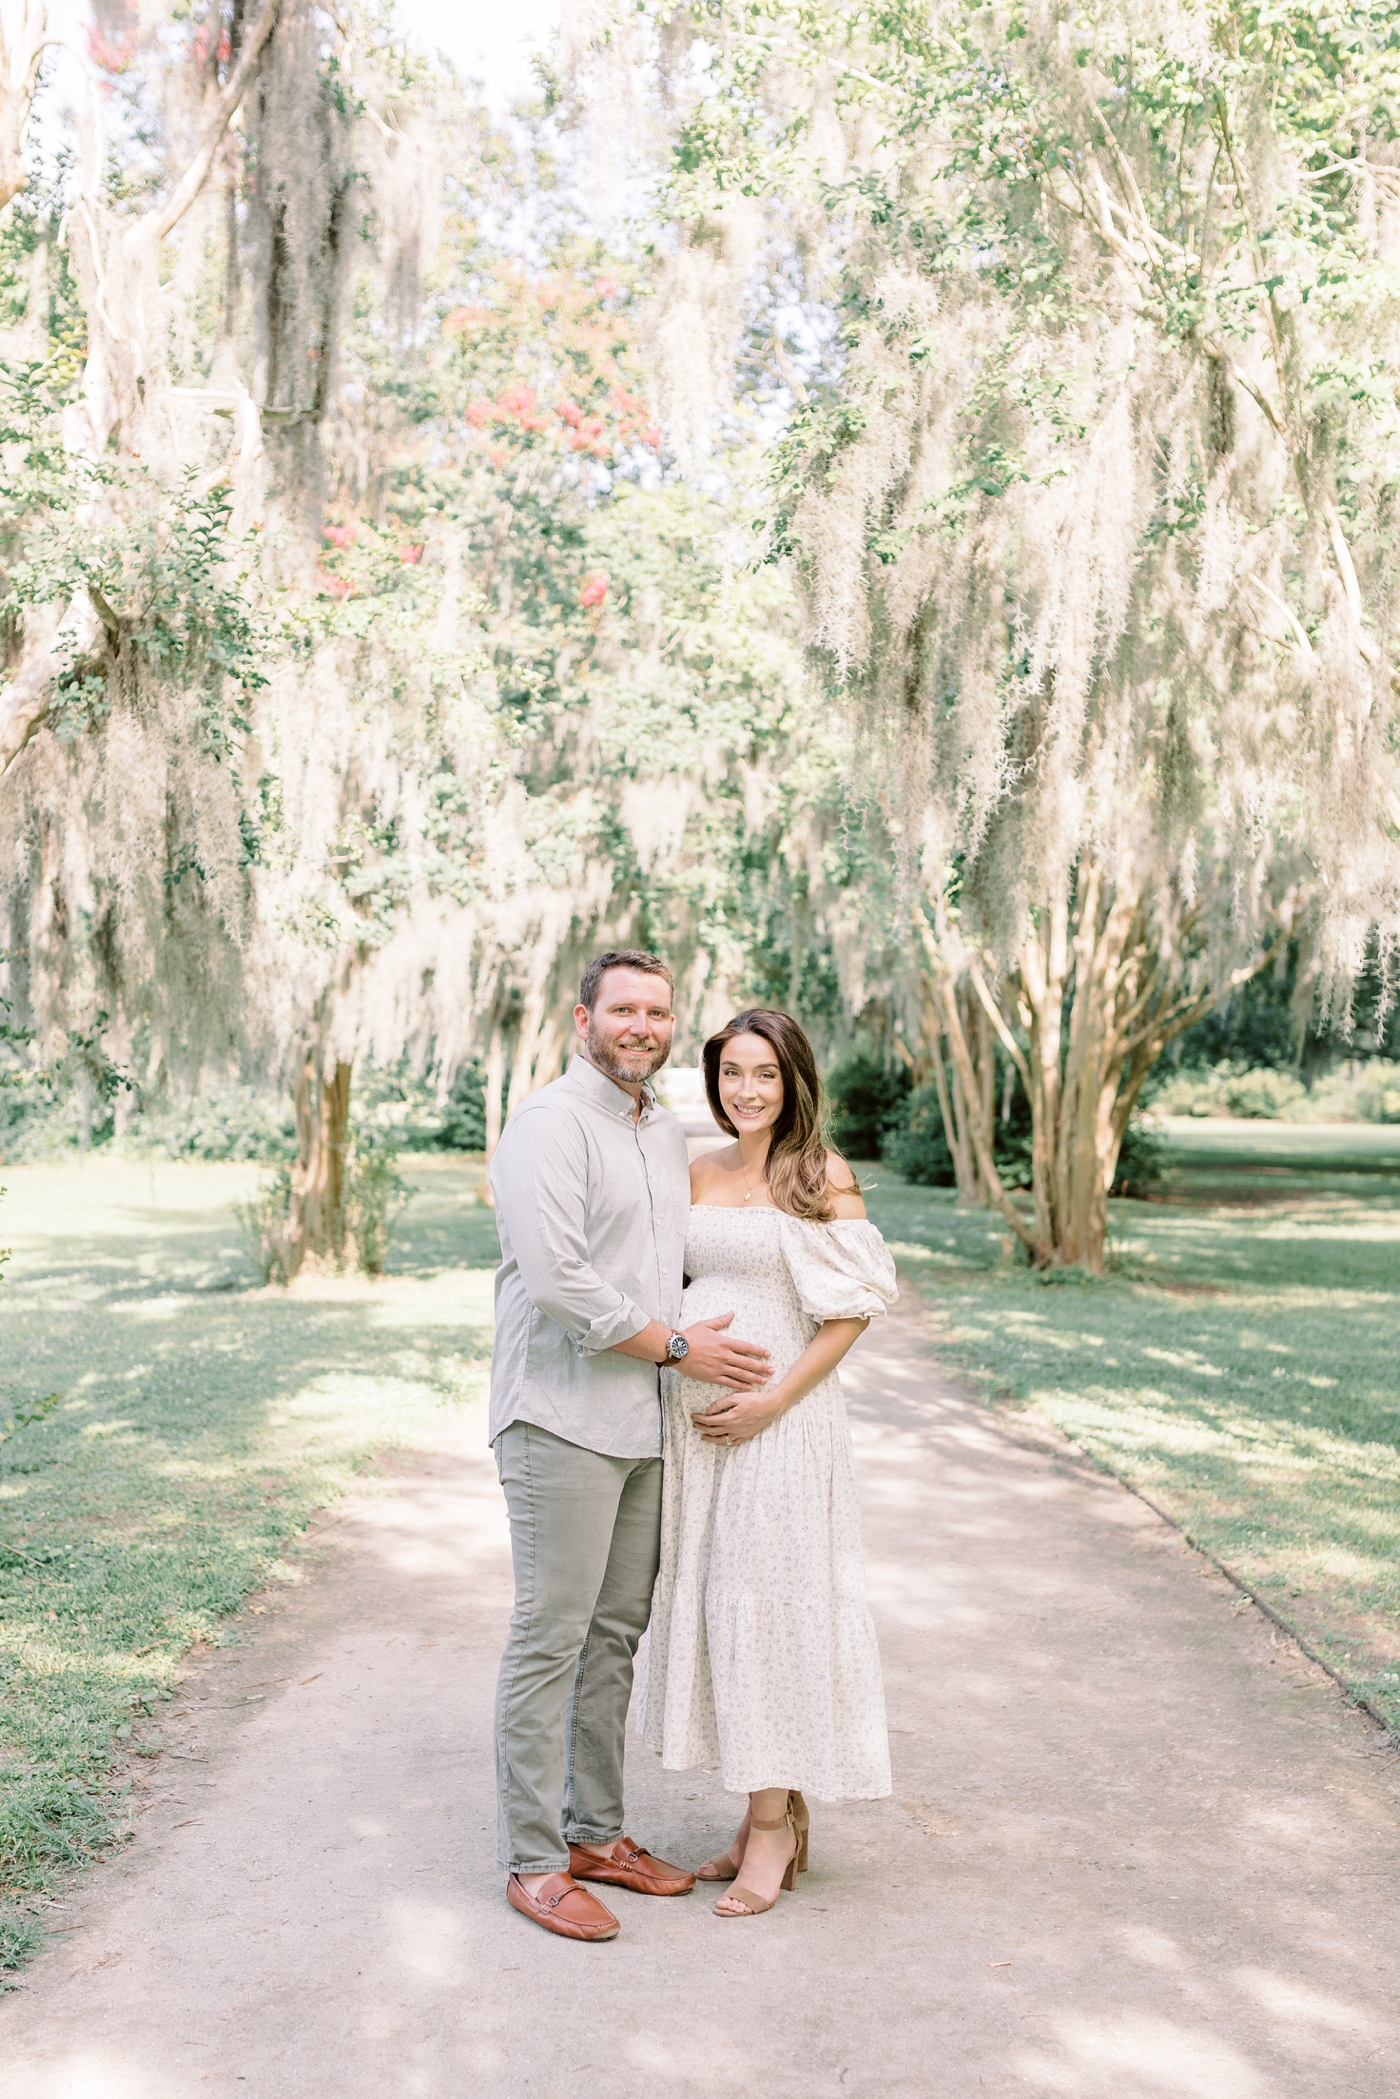 Mom and dad to be smiling in Hampton Park | Photo by Caitlyn Motycka Photography.